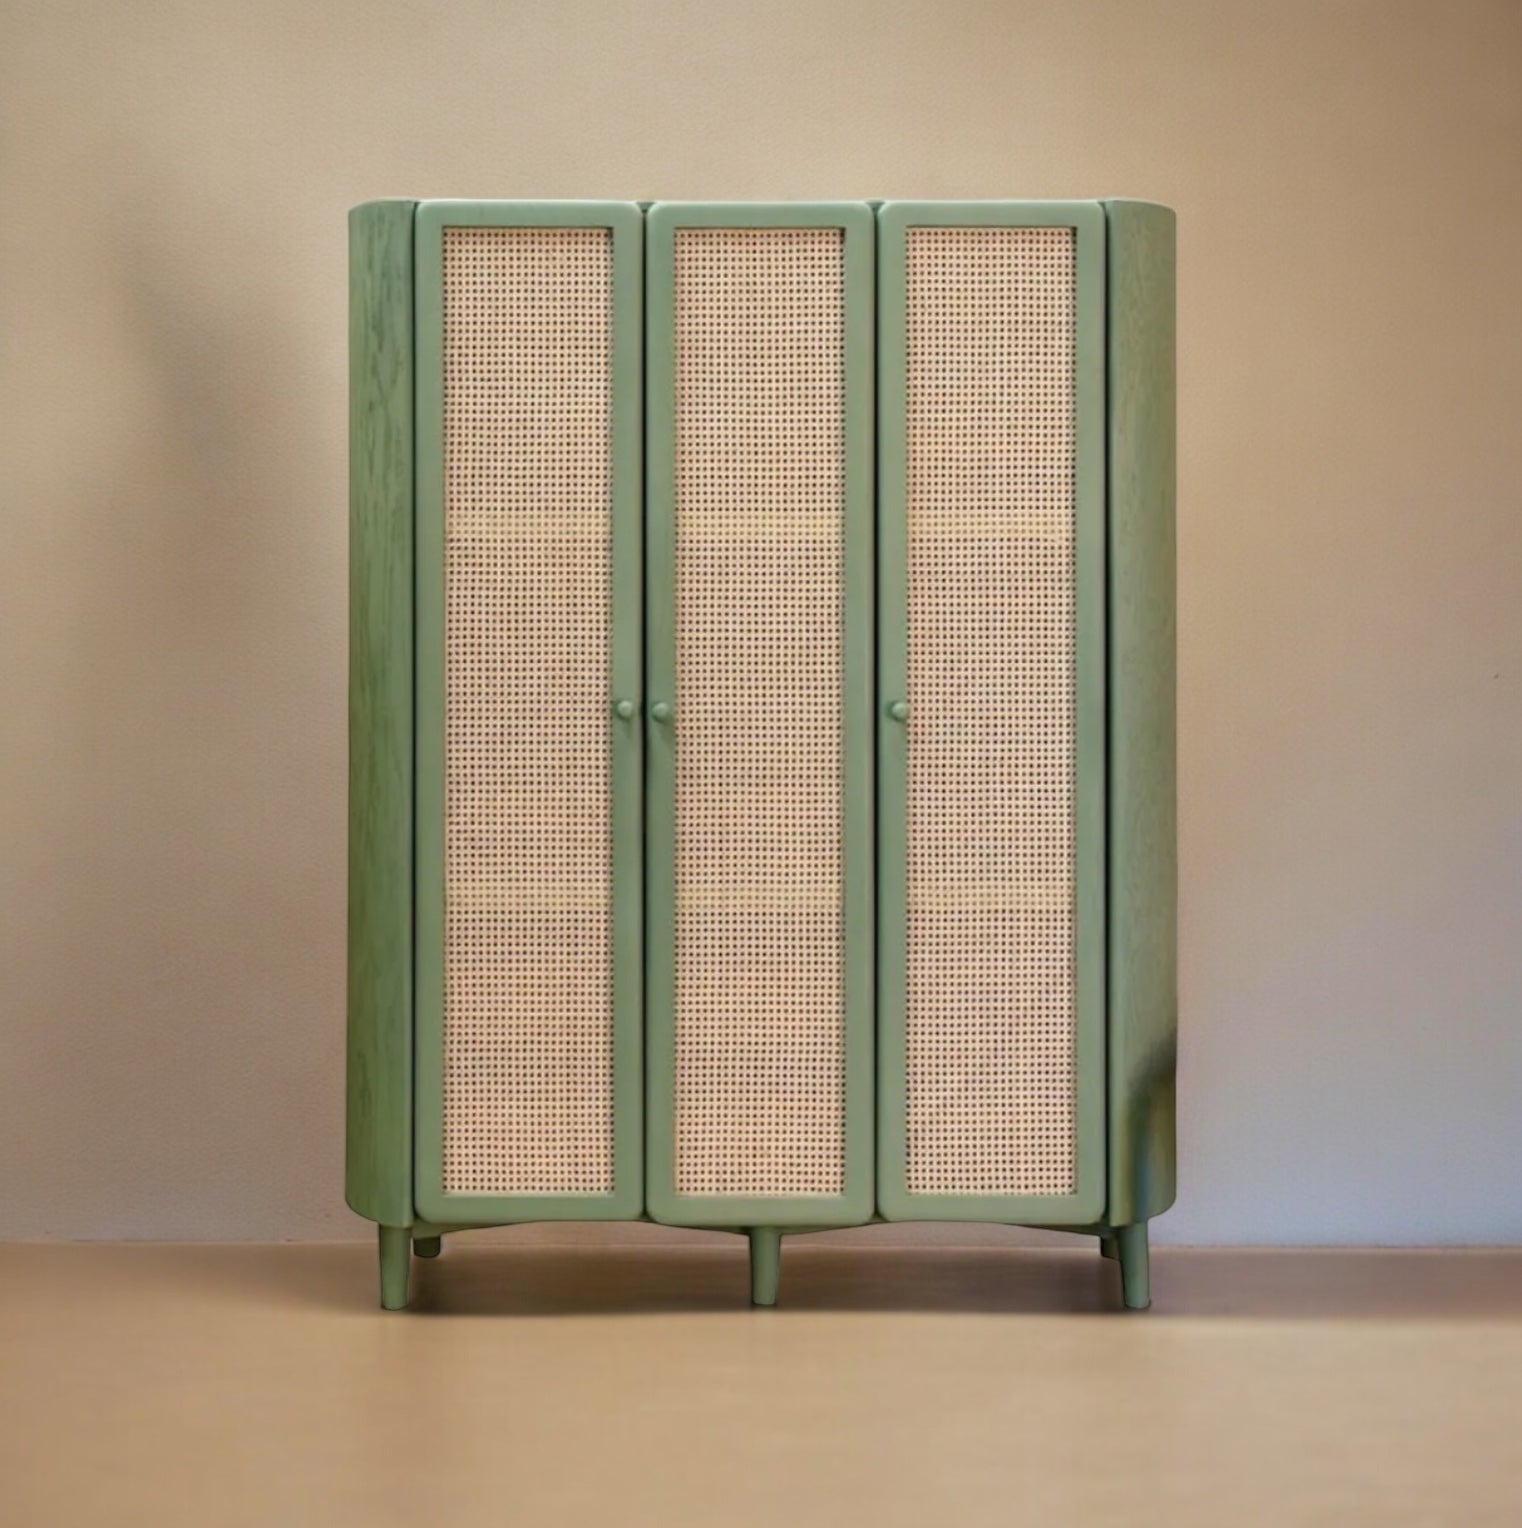 Emilia Tall Cabinet in Olive Green by KAO